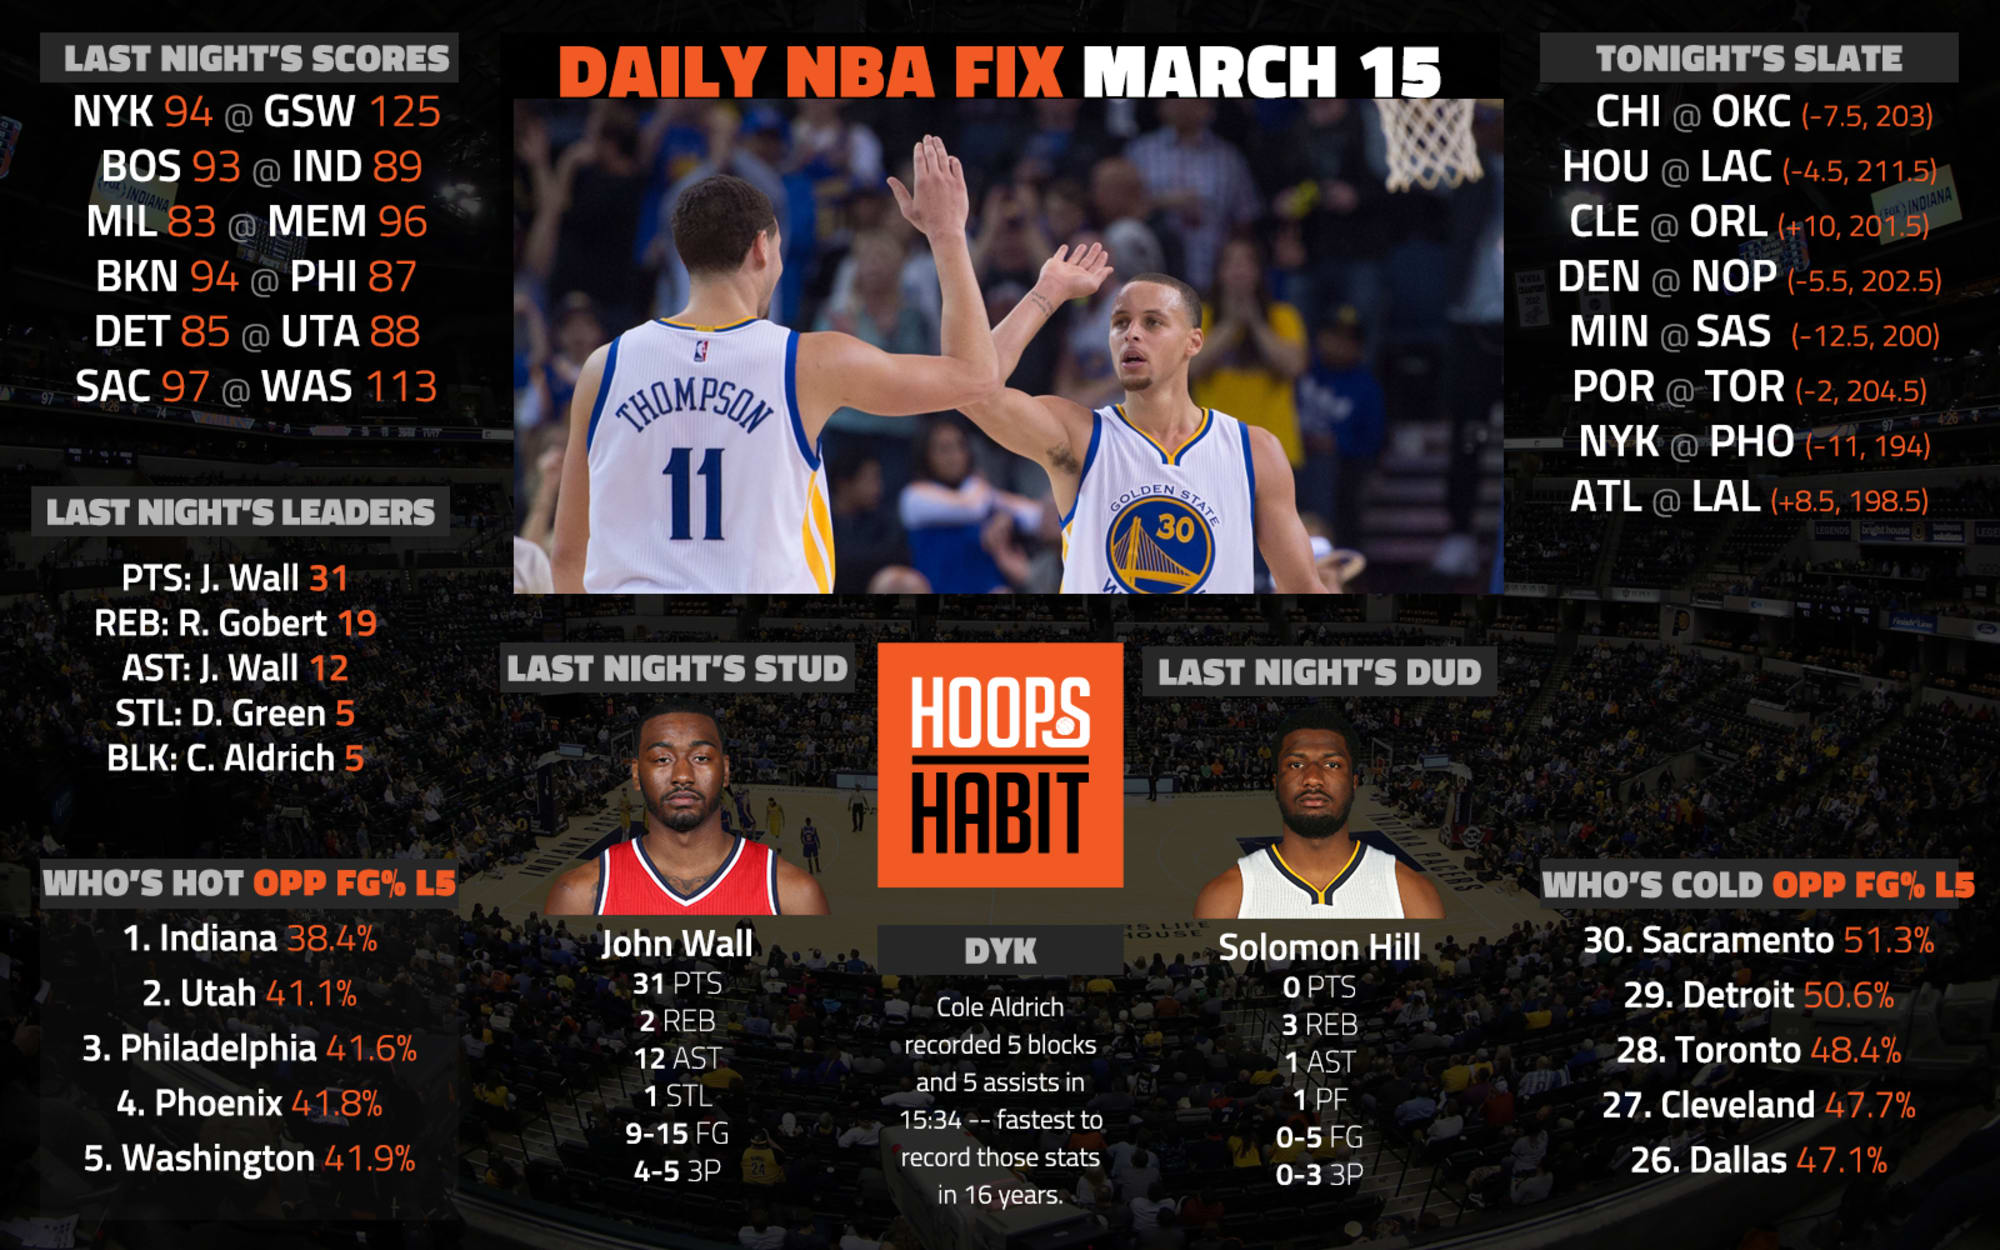 Daily NBA Fix: Scores, Schedules, Stats From Last Night